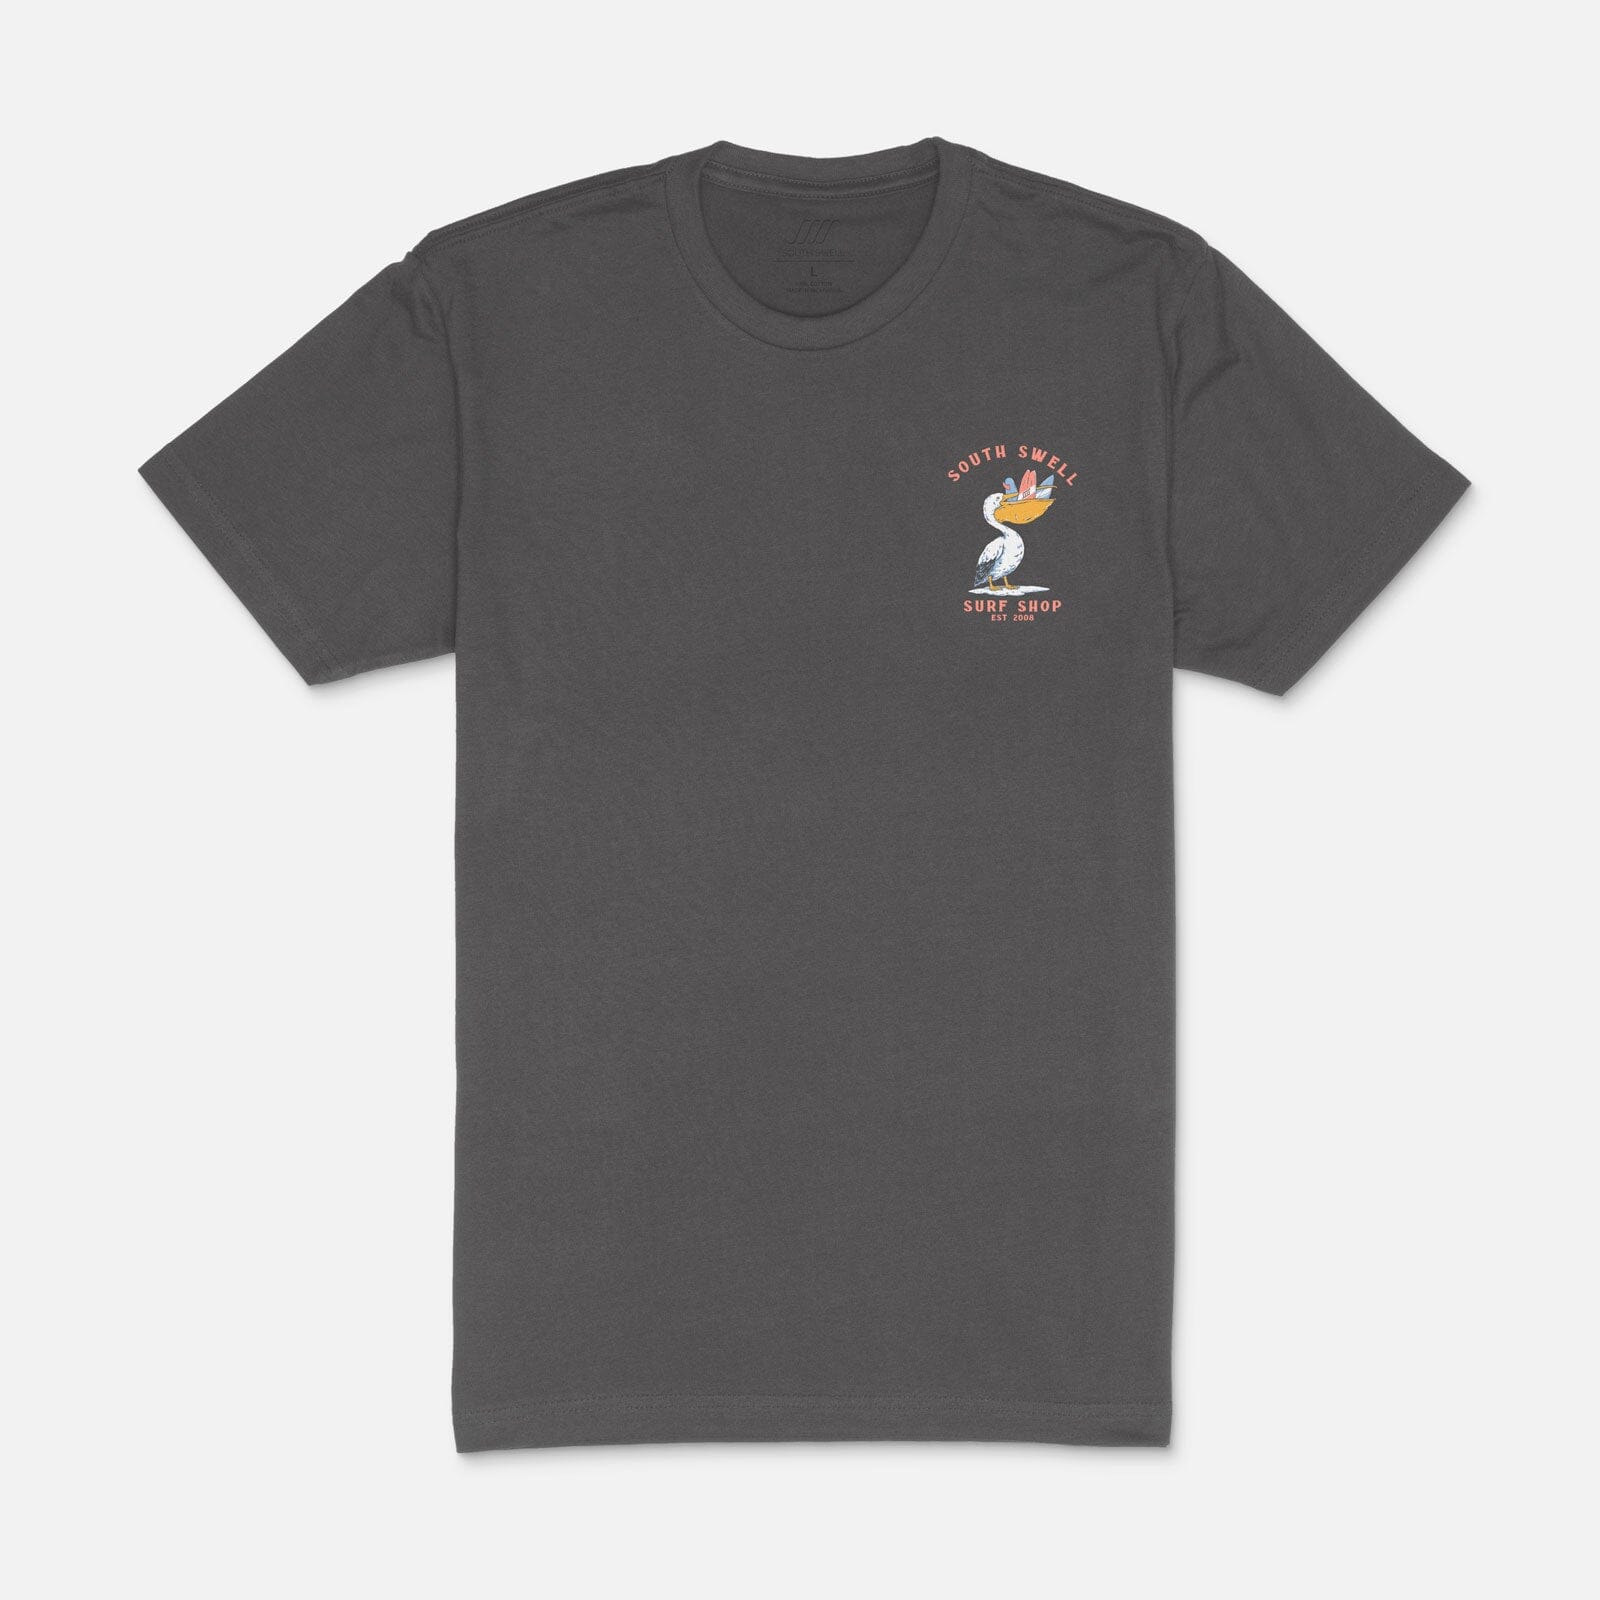 SOUTH SWELL Dirty Bird Youth T-Shirt Y Shirt SOUTH SWELL 